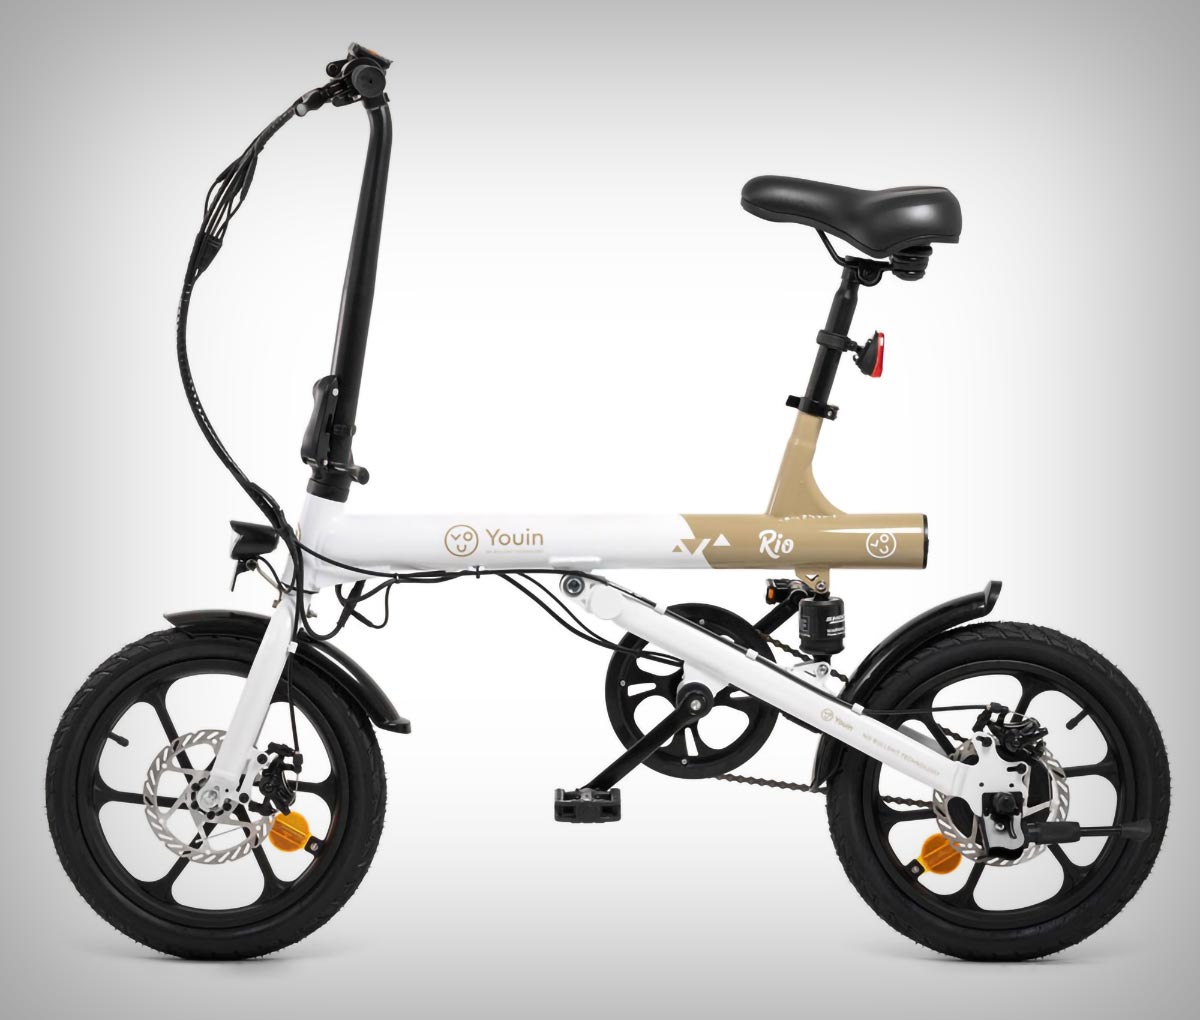 Youin Rio Is The Brand'S Smallest Folding Electric Bike That Is Ideal To Take On The Go